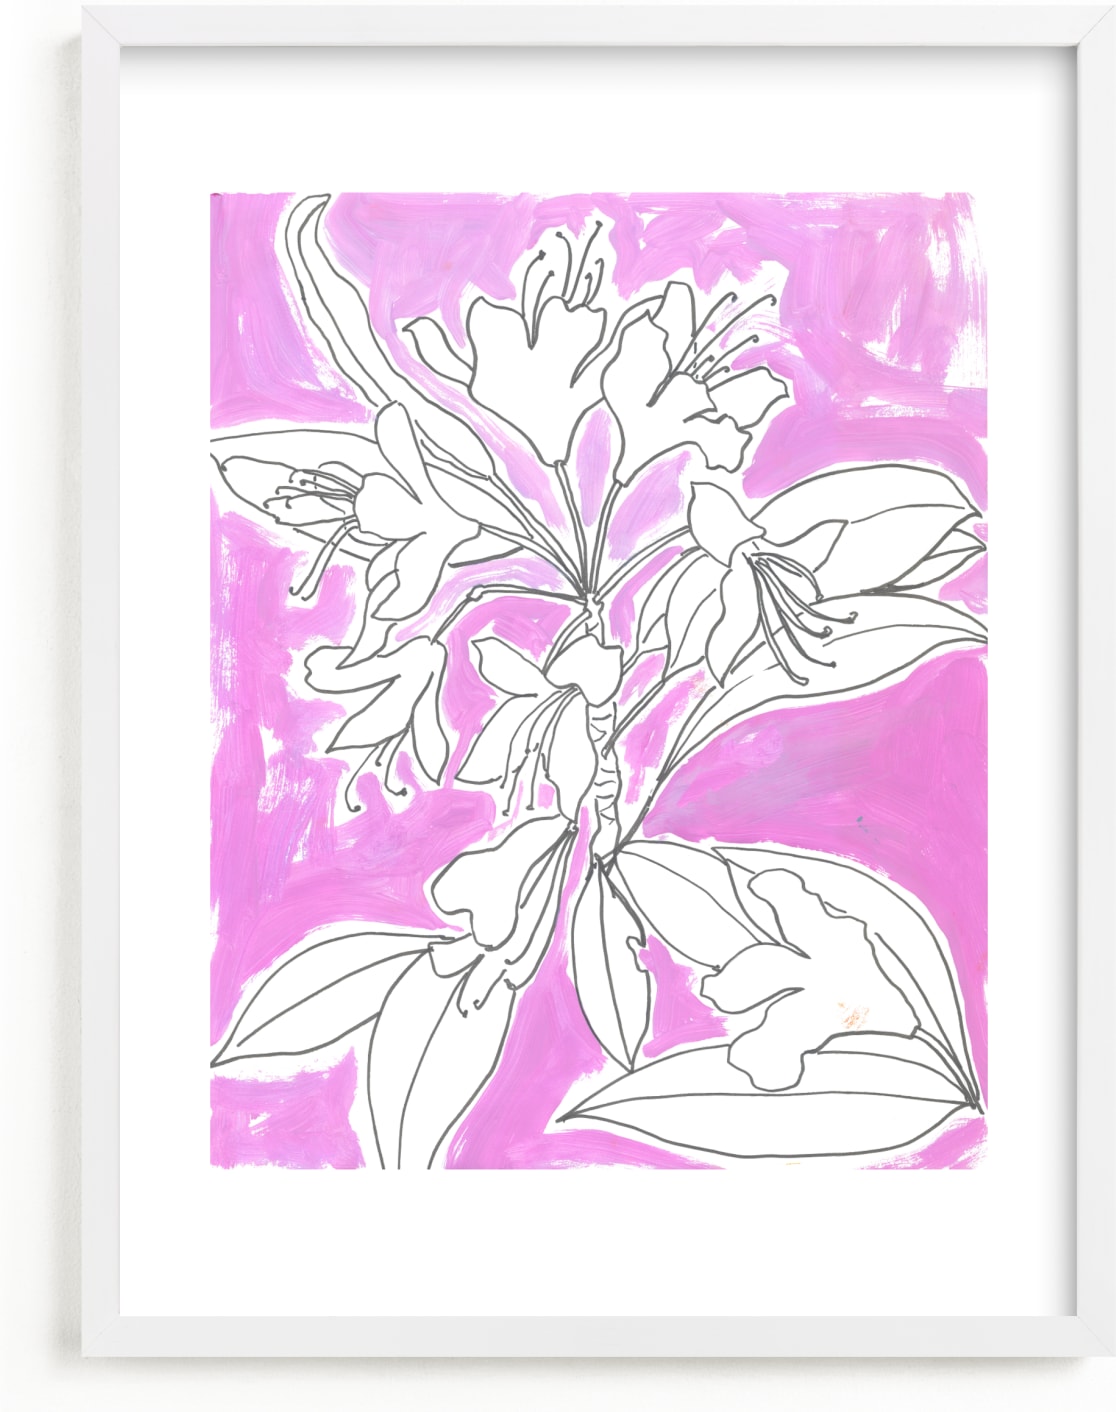 This is a black and white kids wall art by Lise Gulassa called Lush Botanical Gallery II.